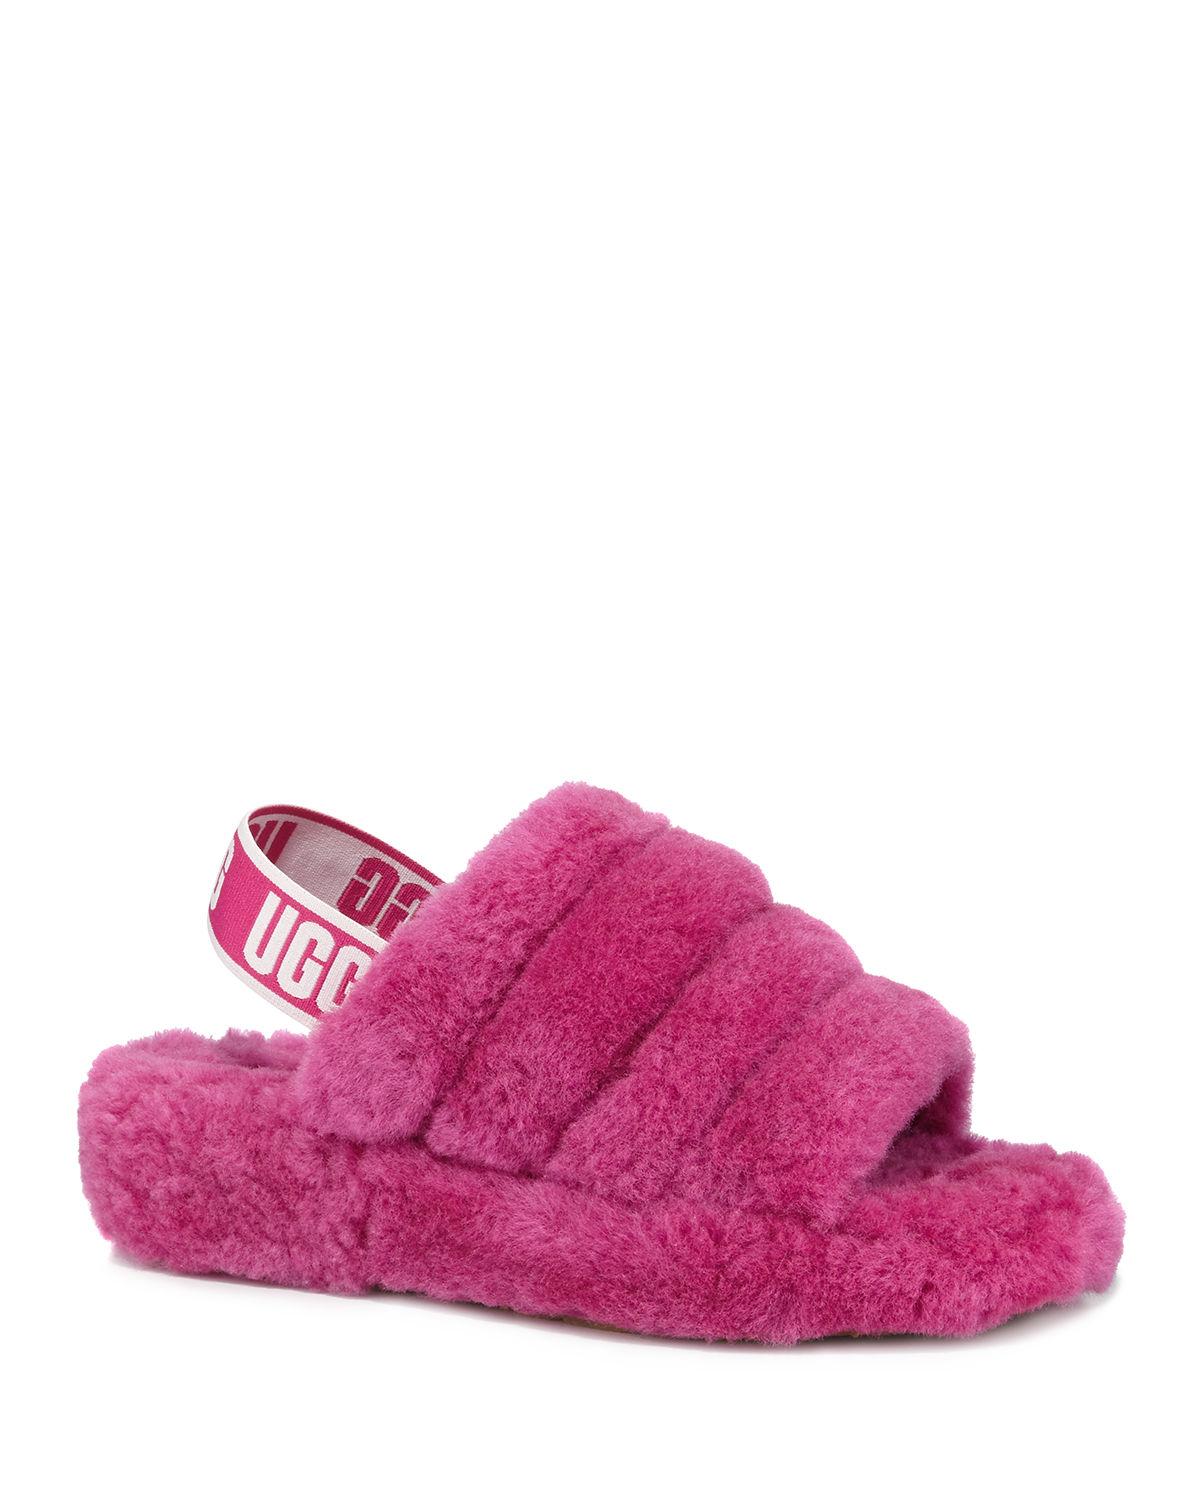 UGG Leather Fluff Yeah Shearling Sandal Slippers in Fuchsia (Purple) - Lyst